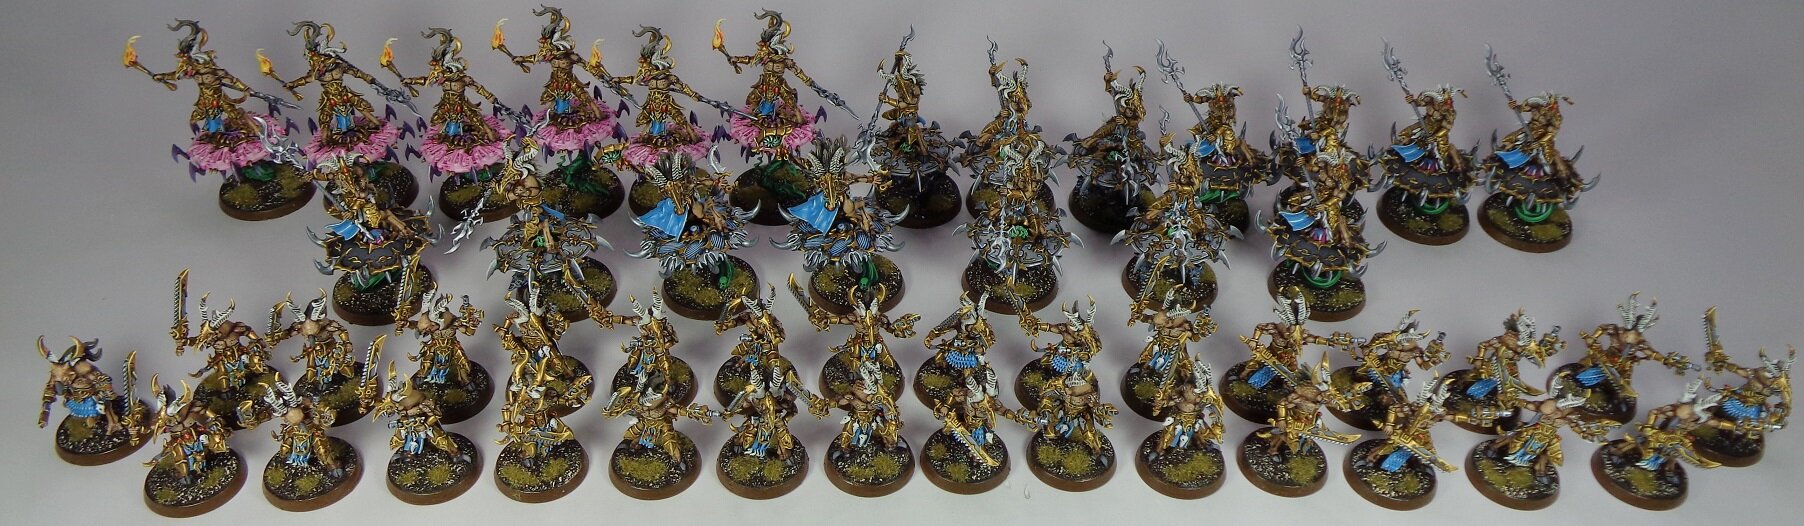 Thousand Sons Miniature Painting Commission (16).JPG